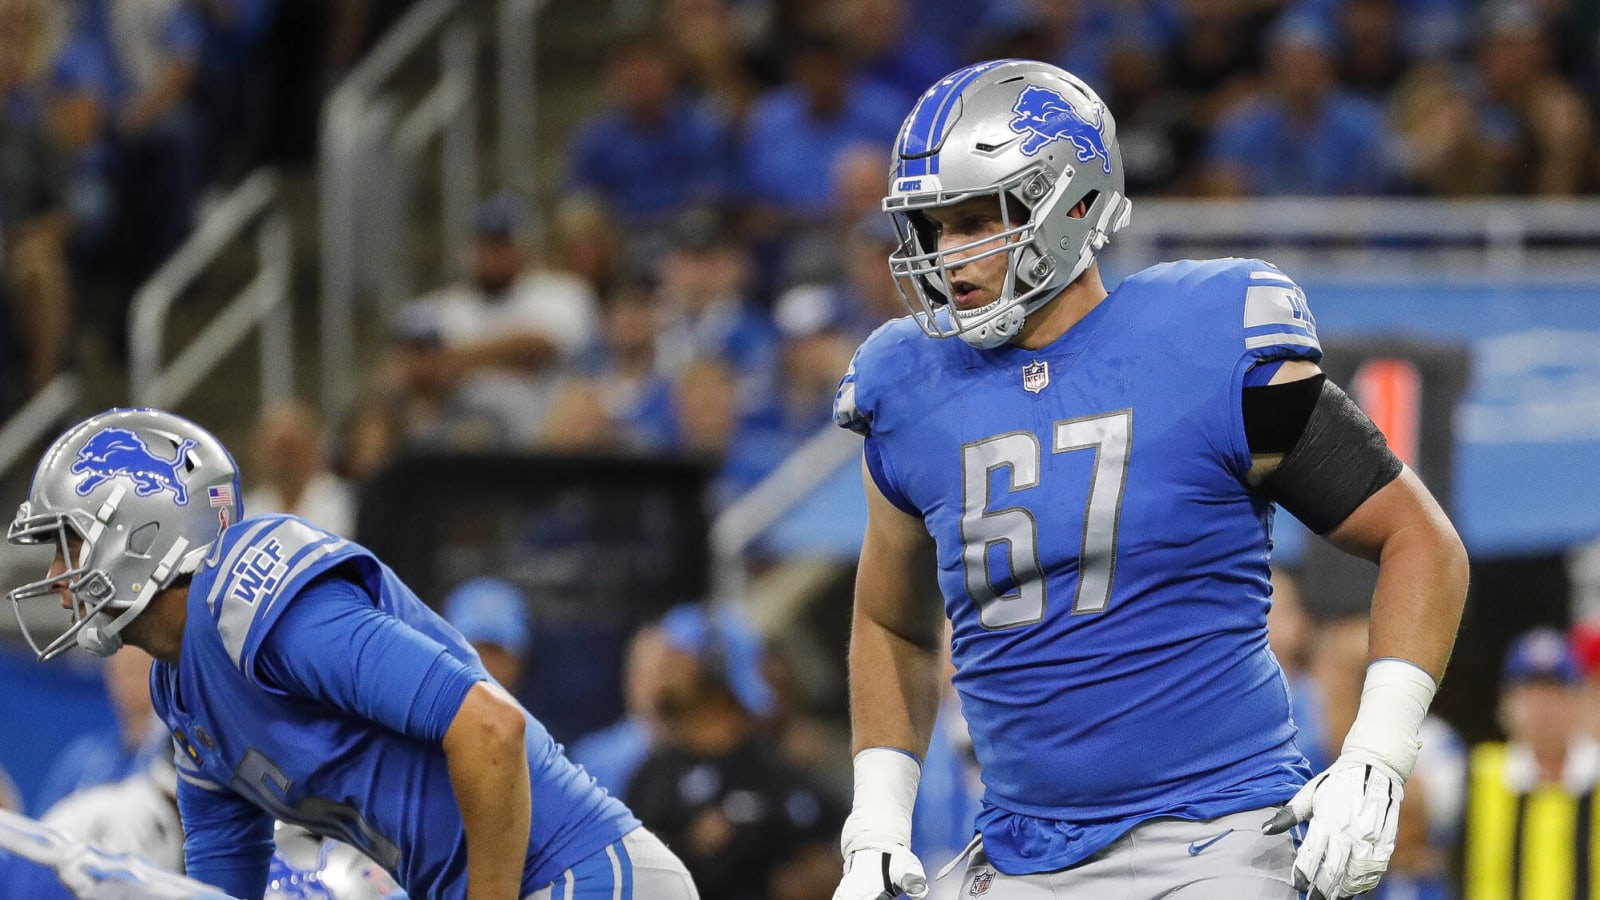 Giants add depth at right tackle with former Lions offensive lineman